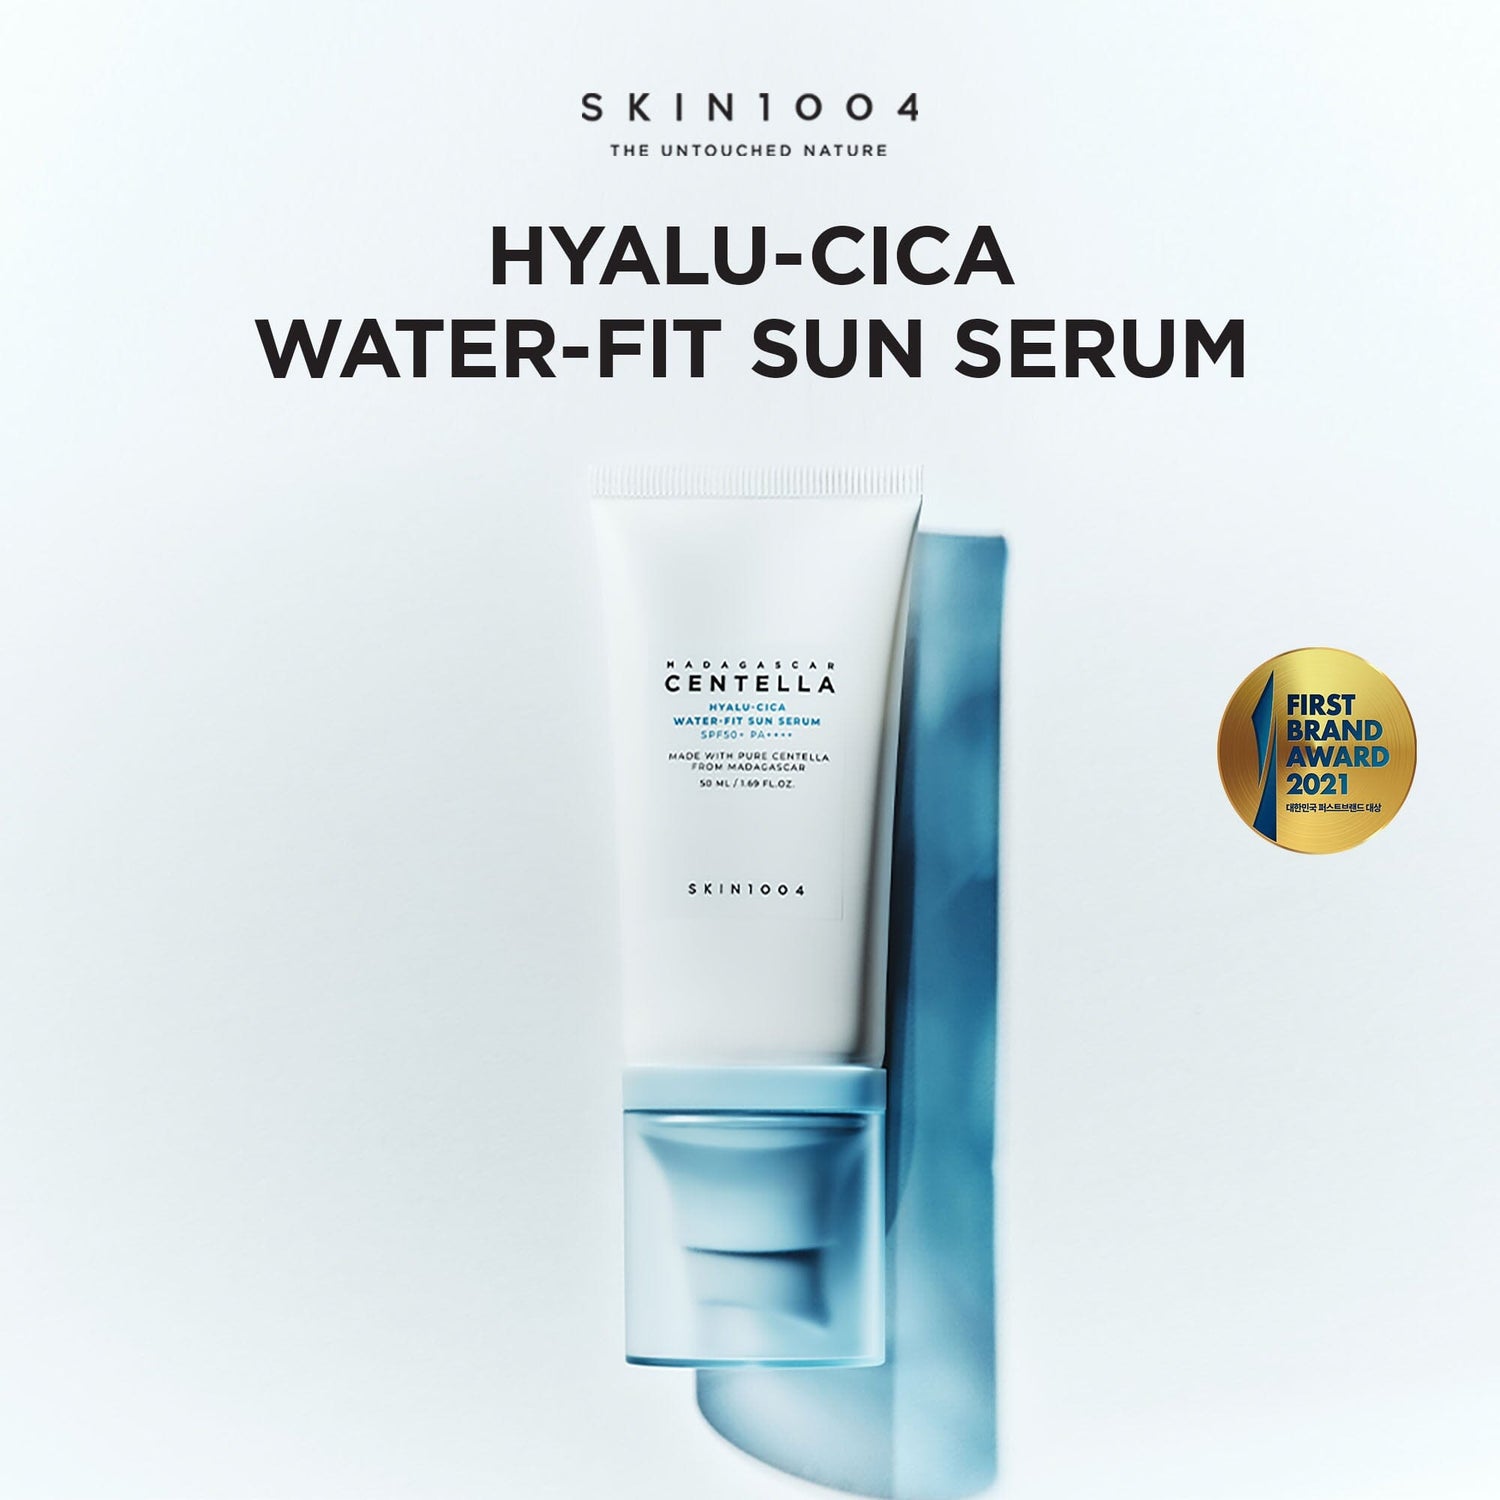 SKIN1004 Madagascar Centella Hyalu-Cica Water-fit Sun Serum SPF50+ PA++++ 50ml, at Orion Beauty. SKIN1004 Official Sole Authorized Retailer in Sri Lanka!